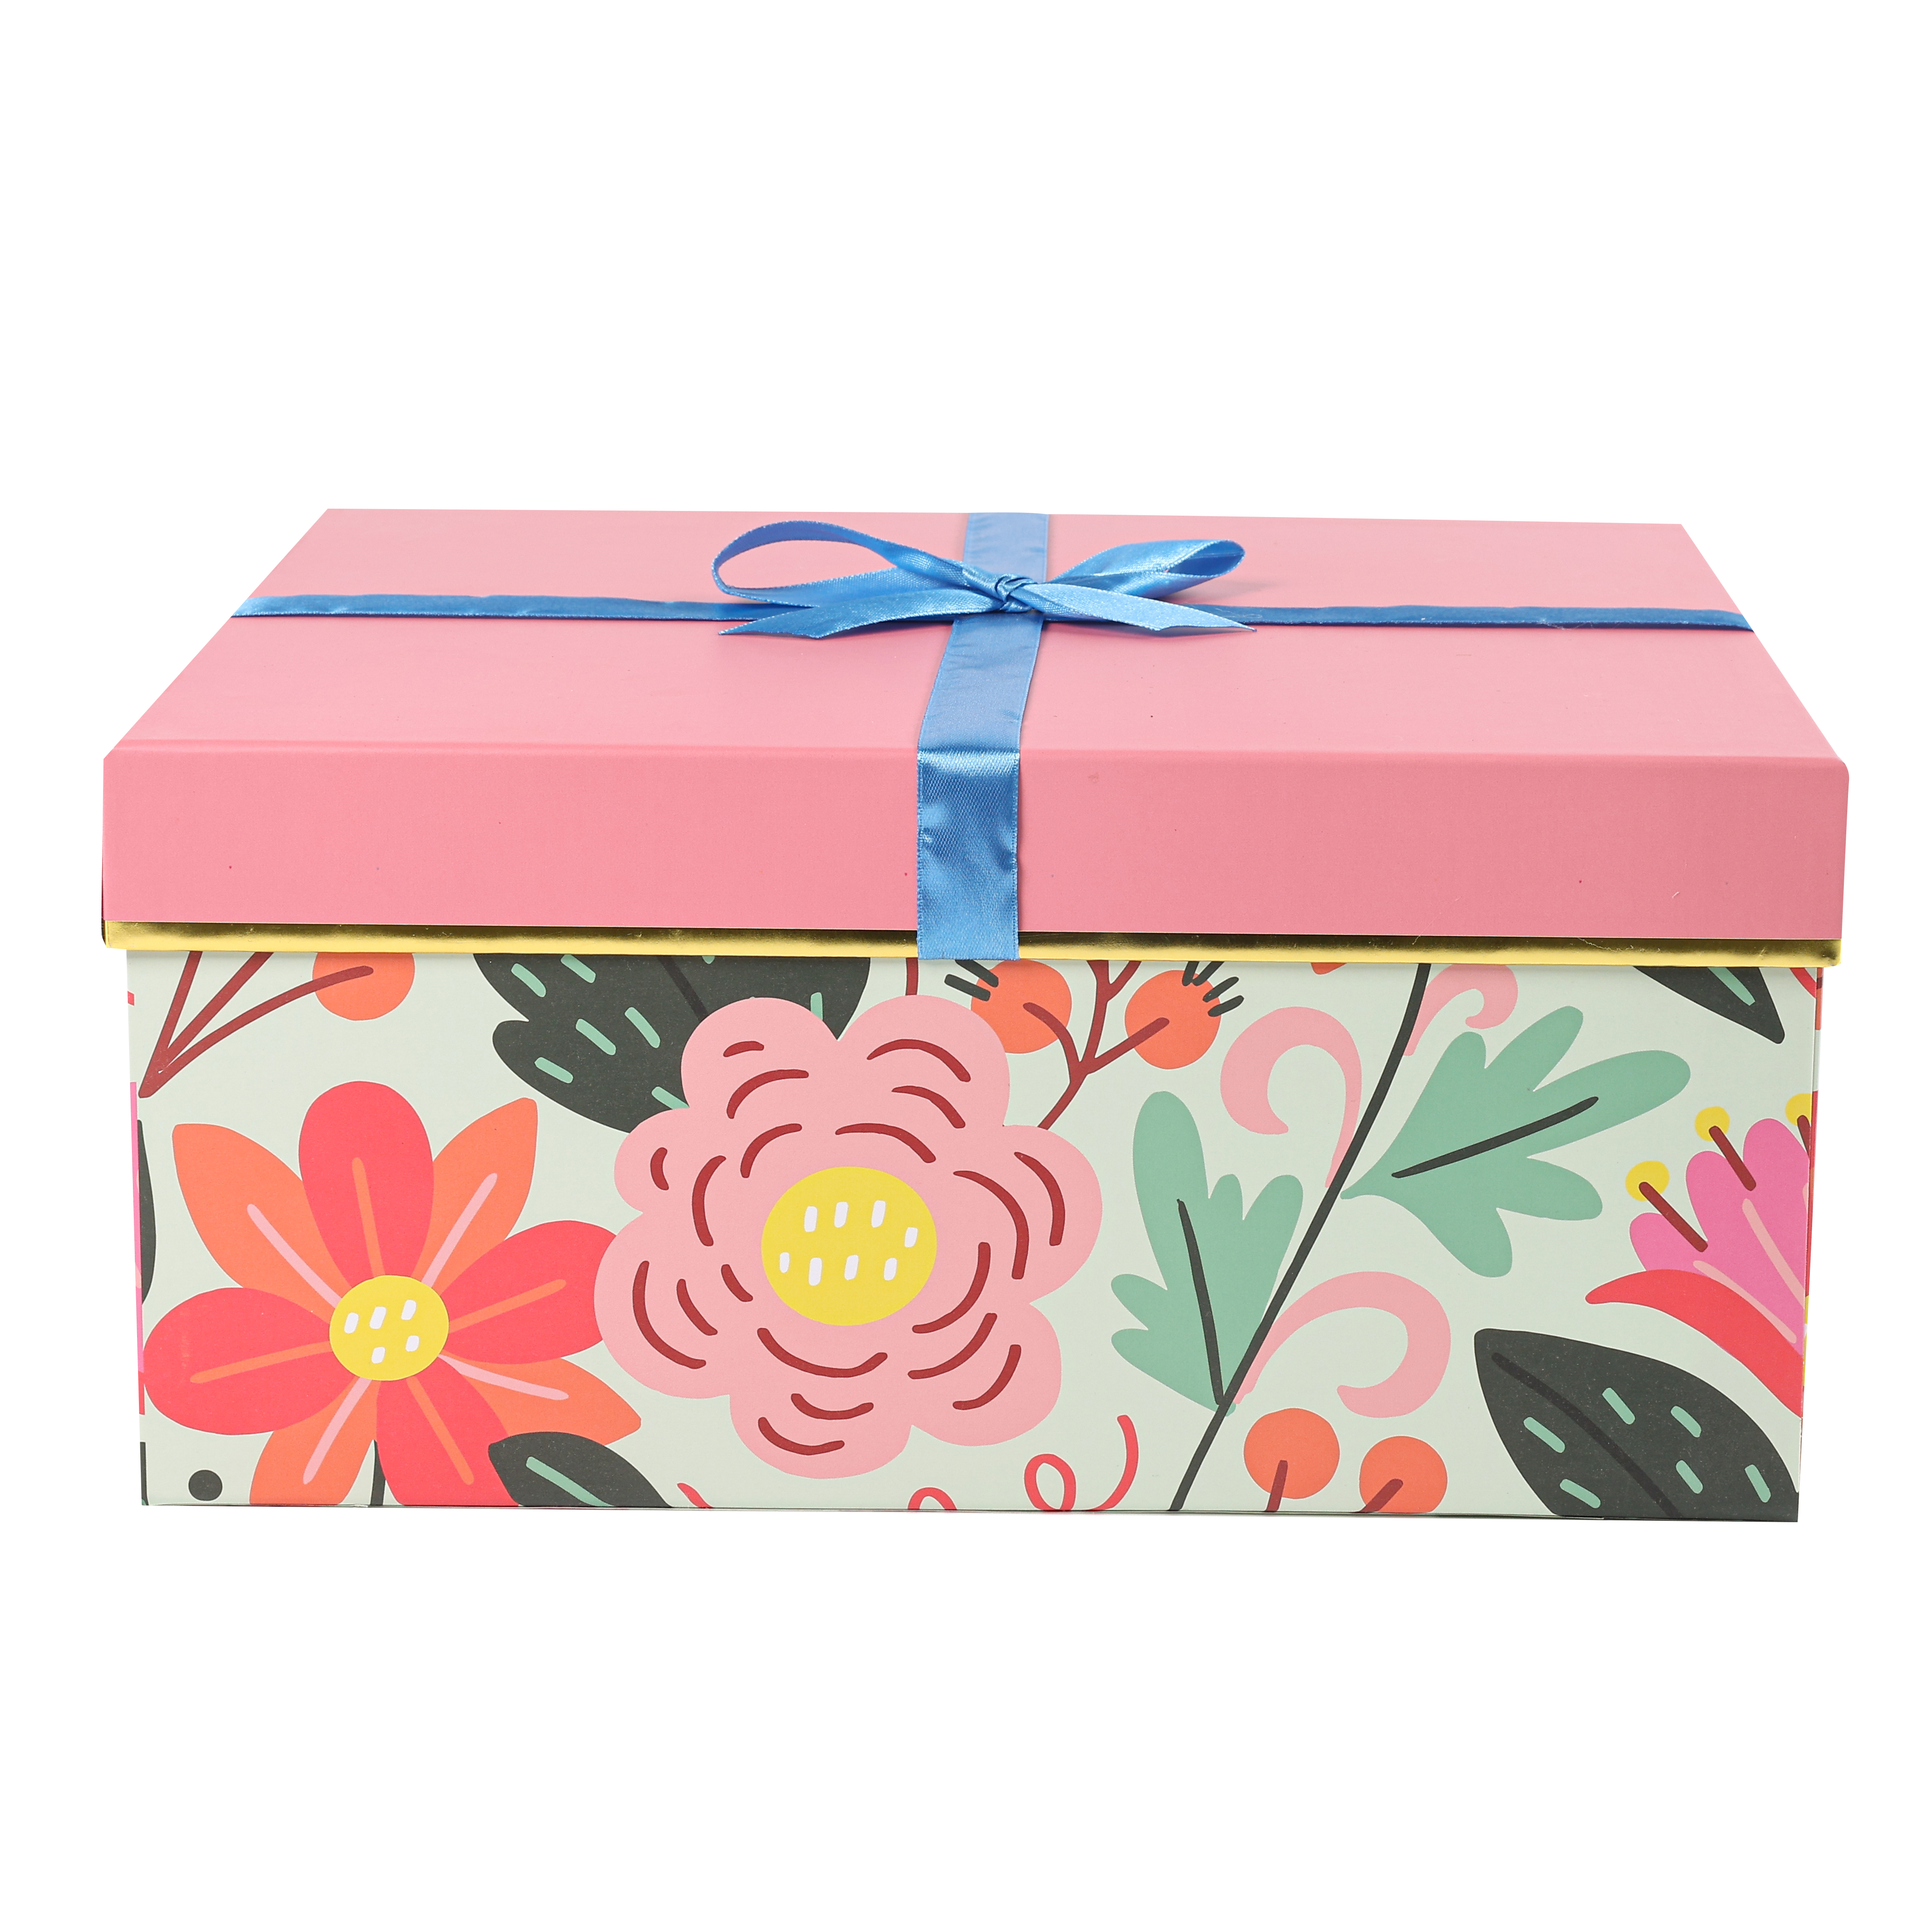 Bow Pink Flower Heaven and Earth Cover Gift Paper Box GB006